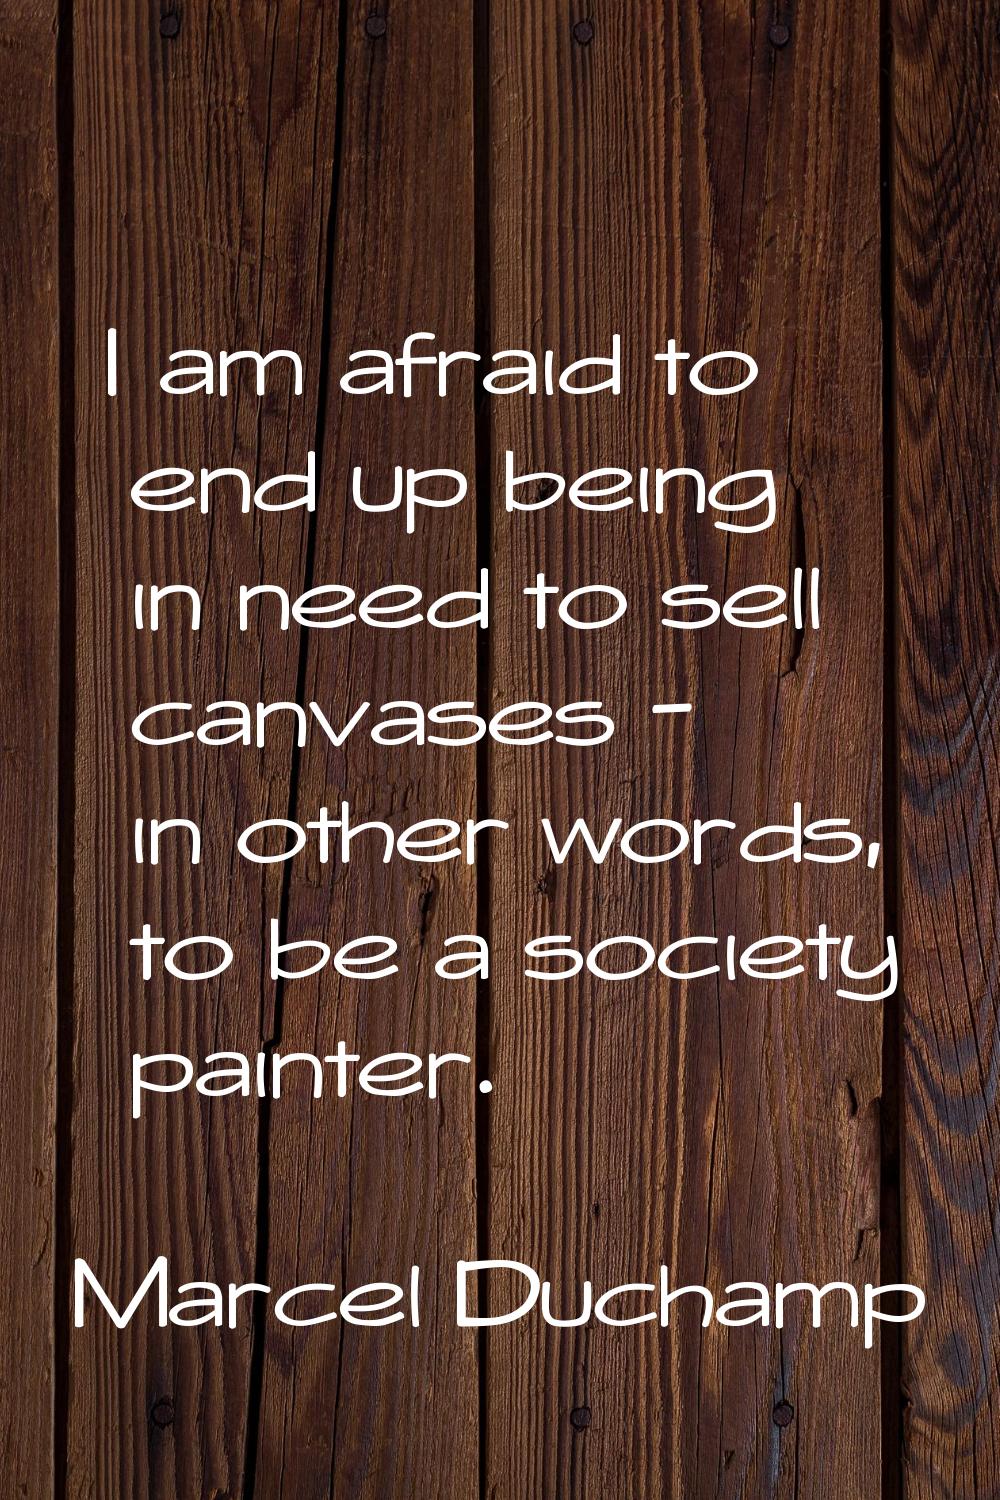 I am afraid to end up being in need to sell canvases - in other words, to be a society painter.